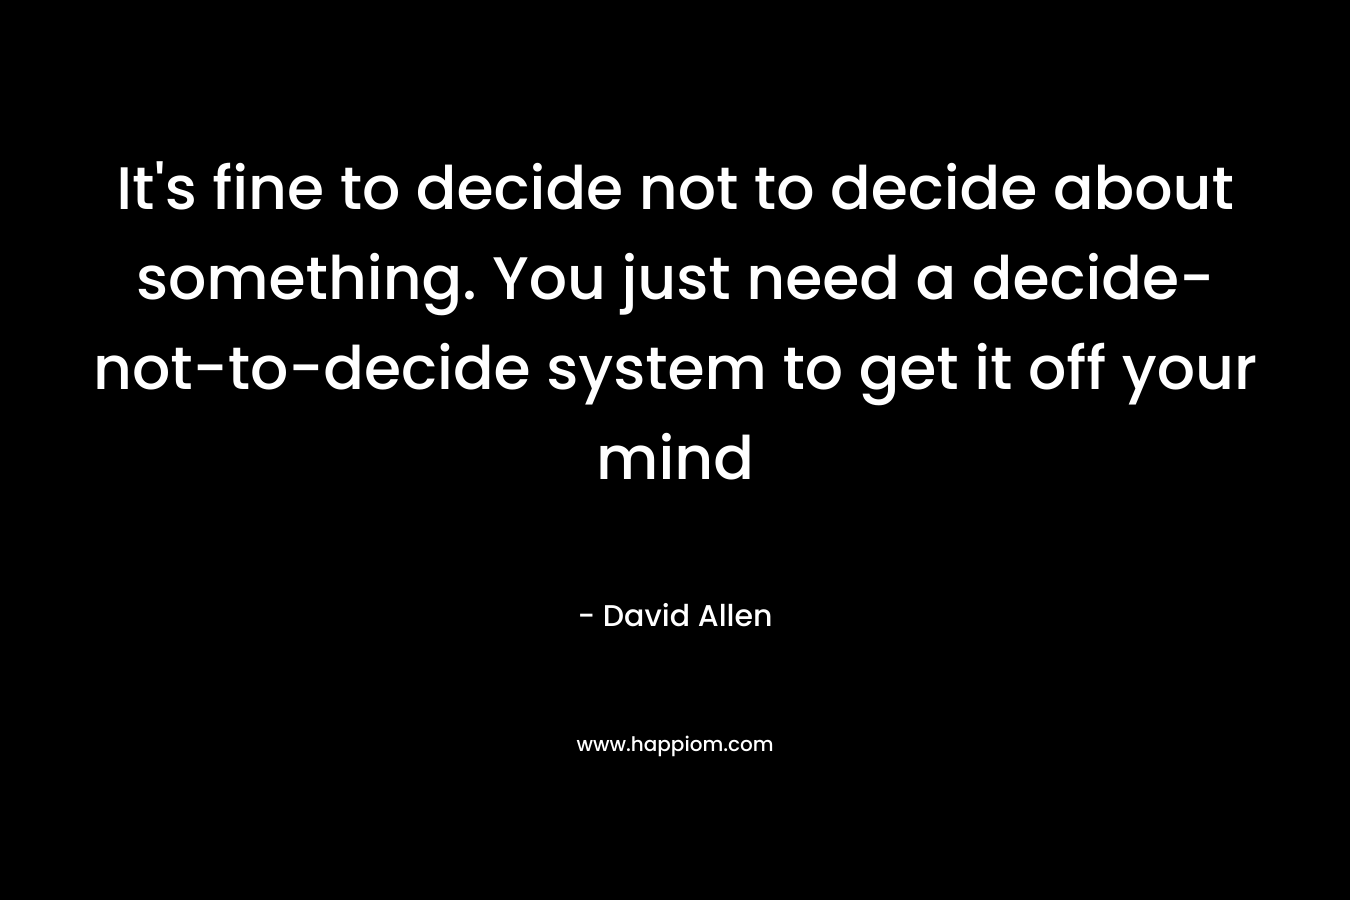 It's fine to decide not to decide about something. You just need a decide-not-to-decide system to get it off your mind